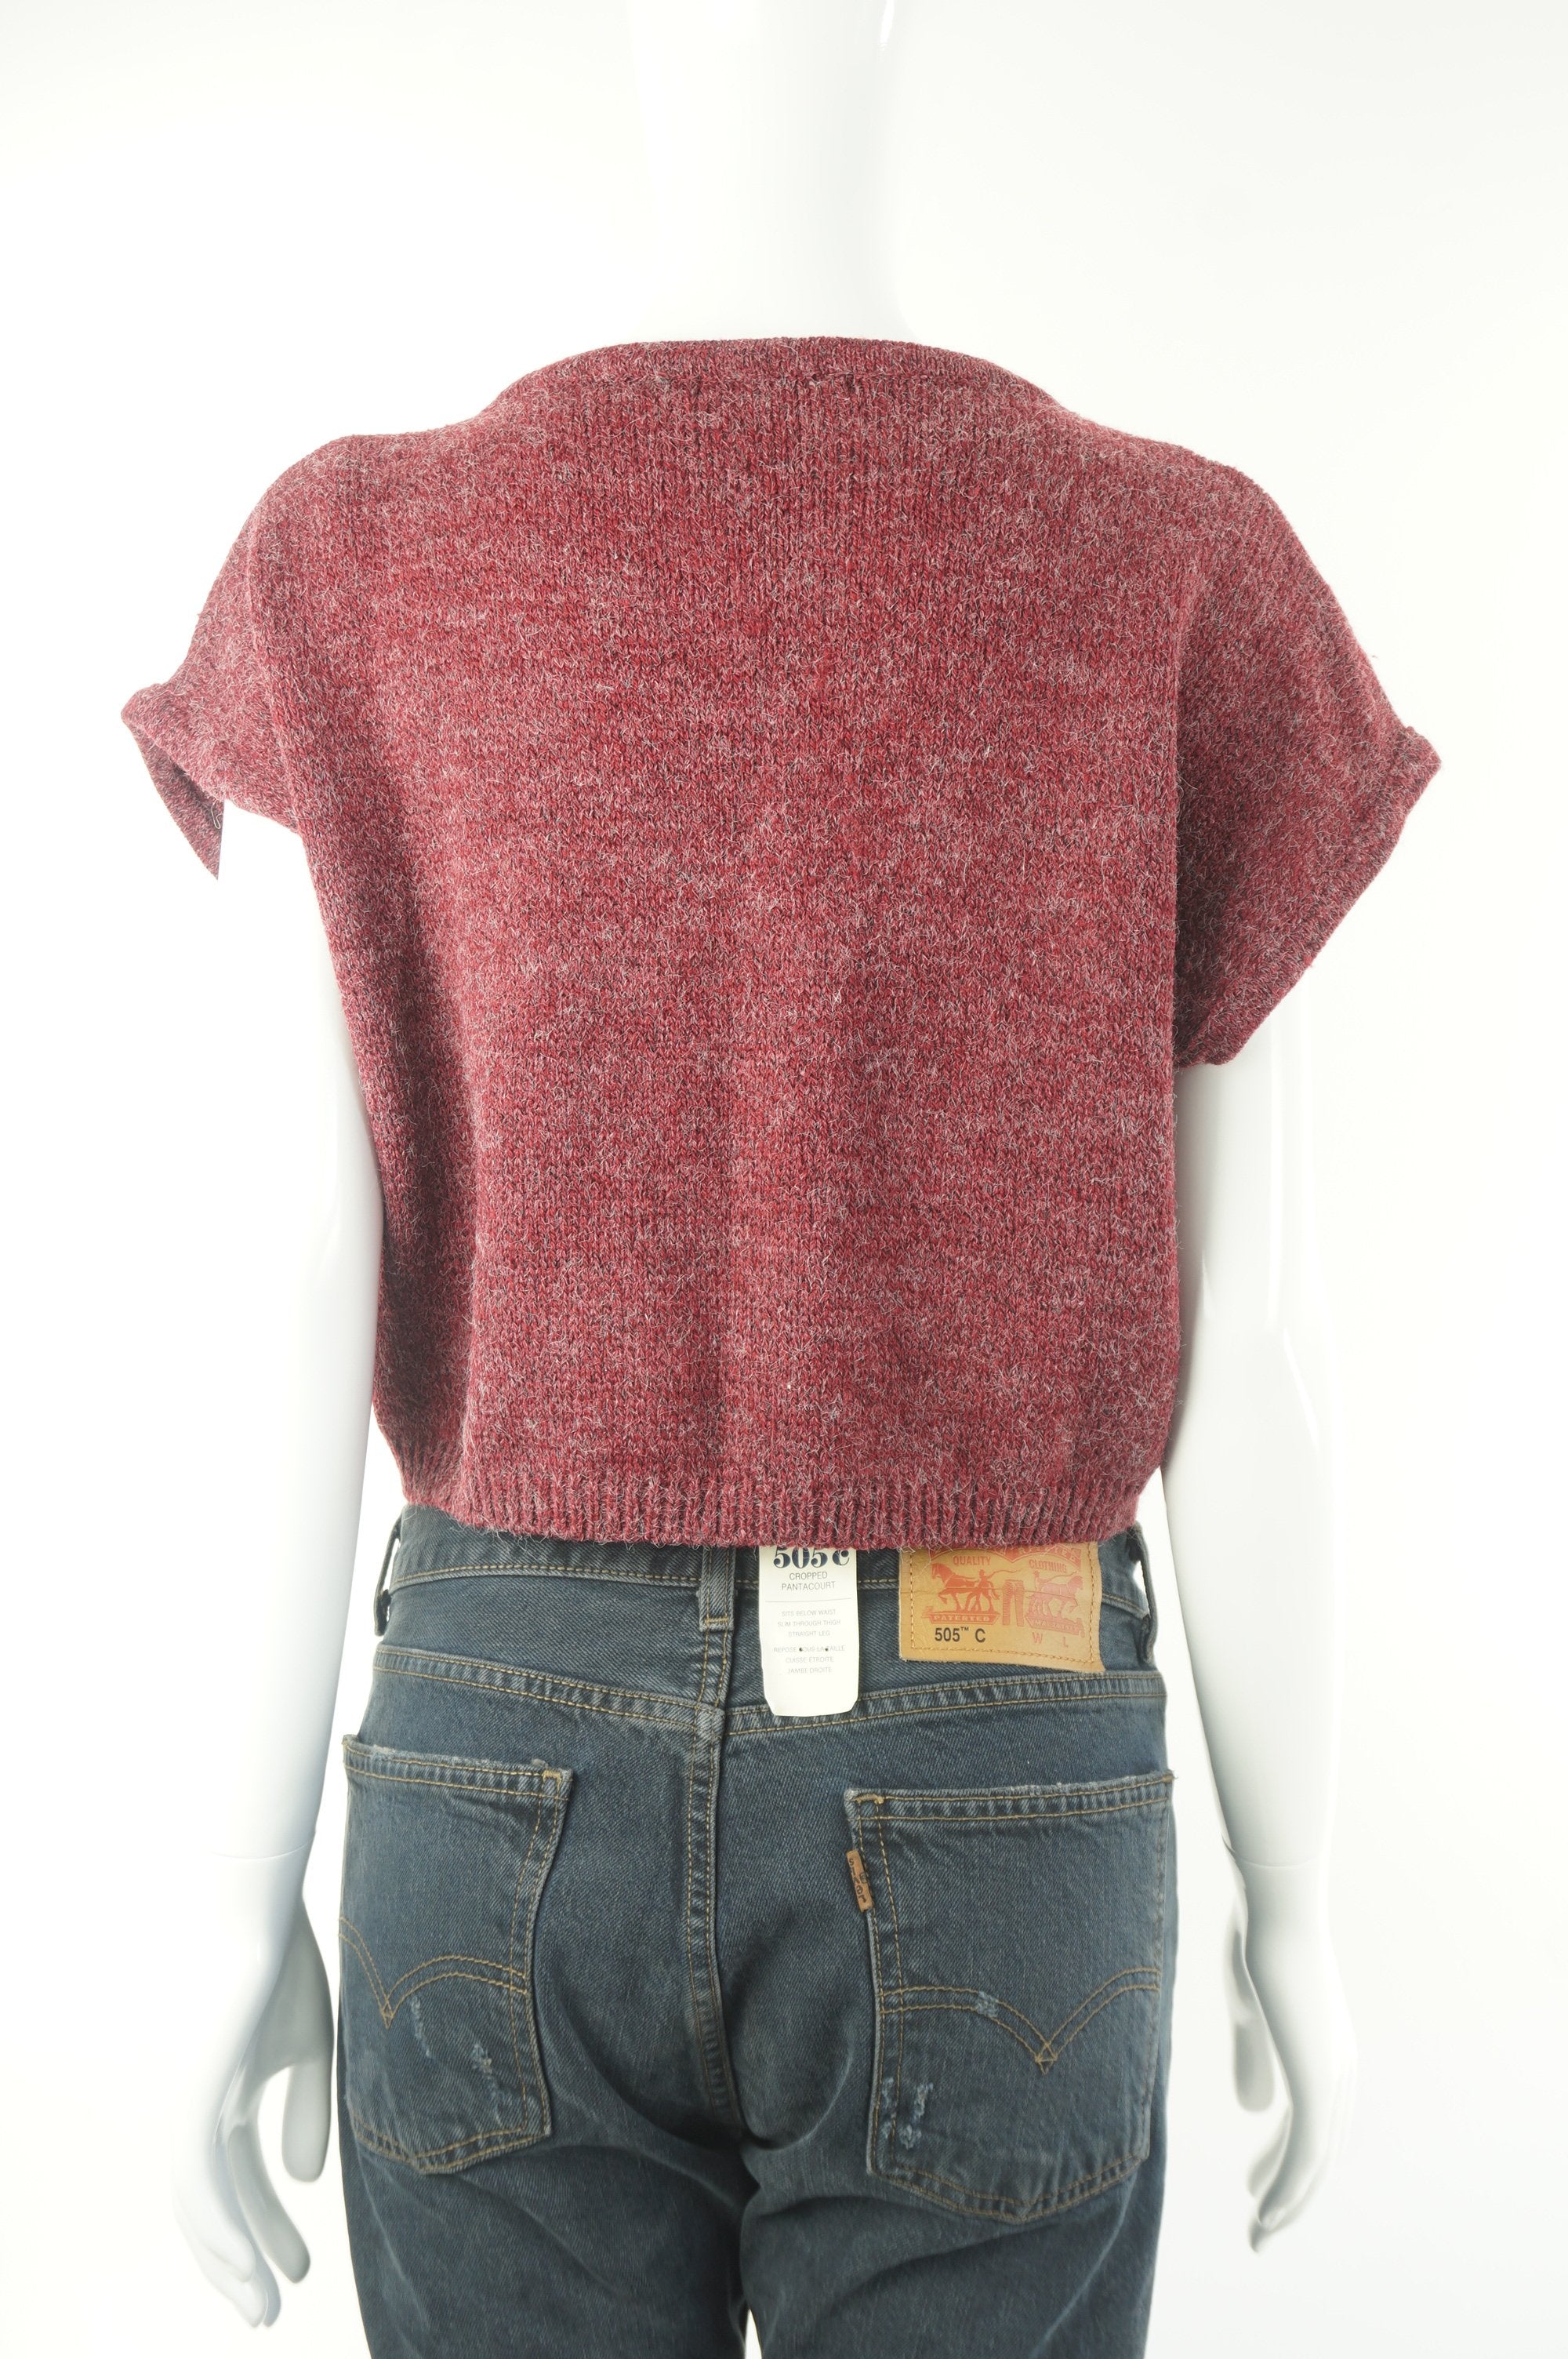 Editor Capped Sleeve Crop Top Sweater, Stylish crop-top sweater for the spring., Red, , women's Tops, women's Red Tops, Editor women's Tops, aritzia women's sweater, aritzia women's crop top sweater, aritzia women's short sweater, women's red crop top sweater